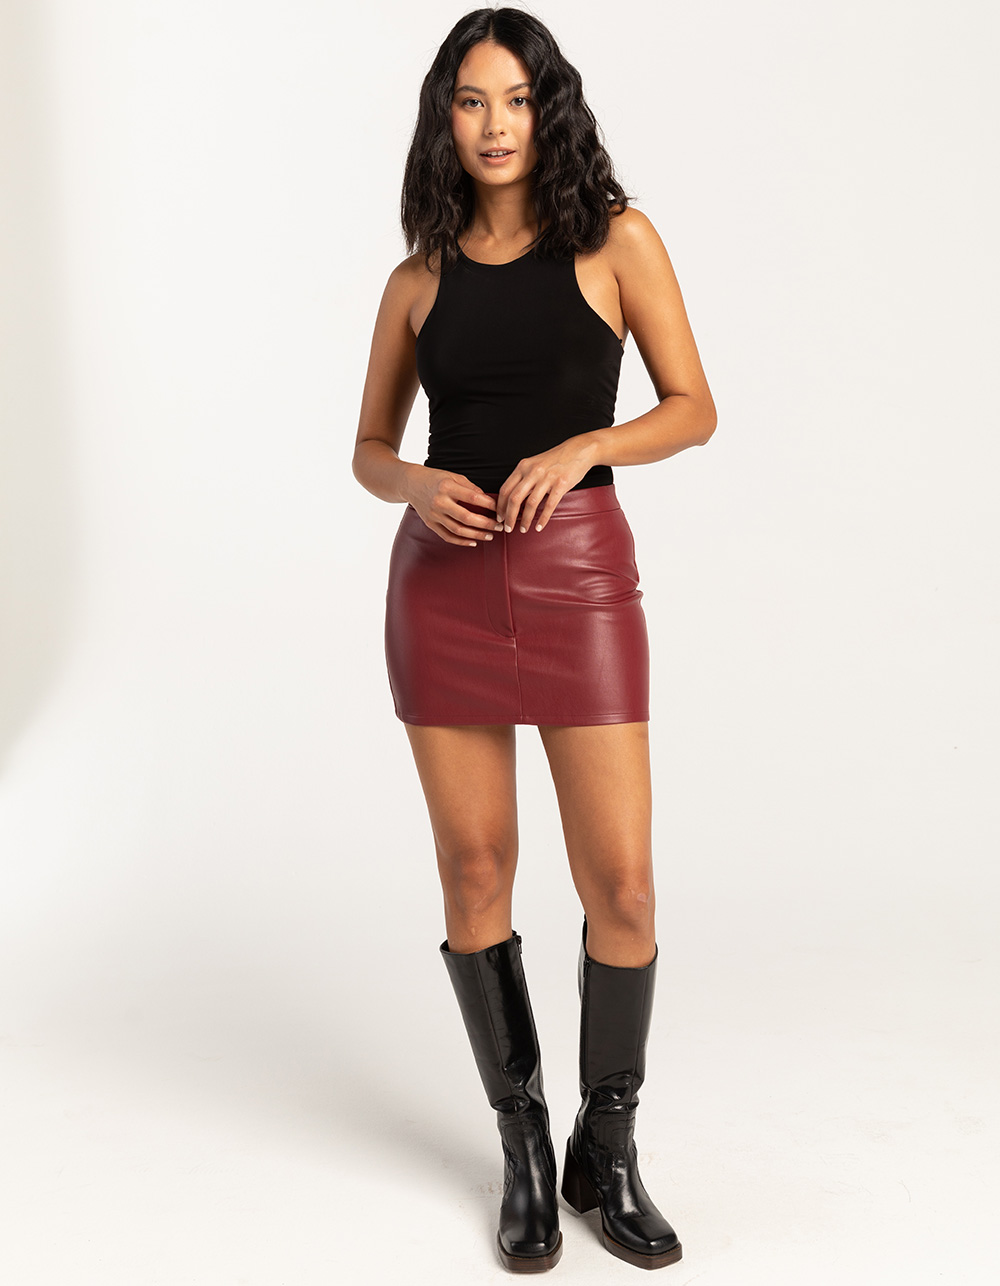 WEST OF MELROSE Faux Leather Womens Mini Skirt - BURGUNDY | Tillys